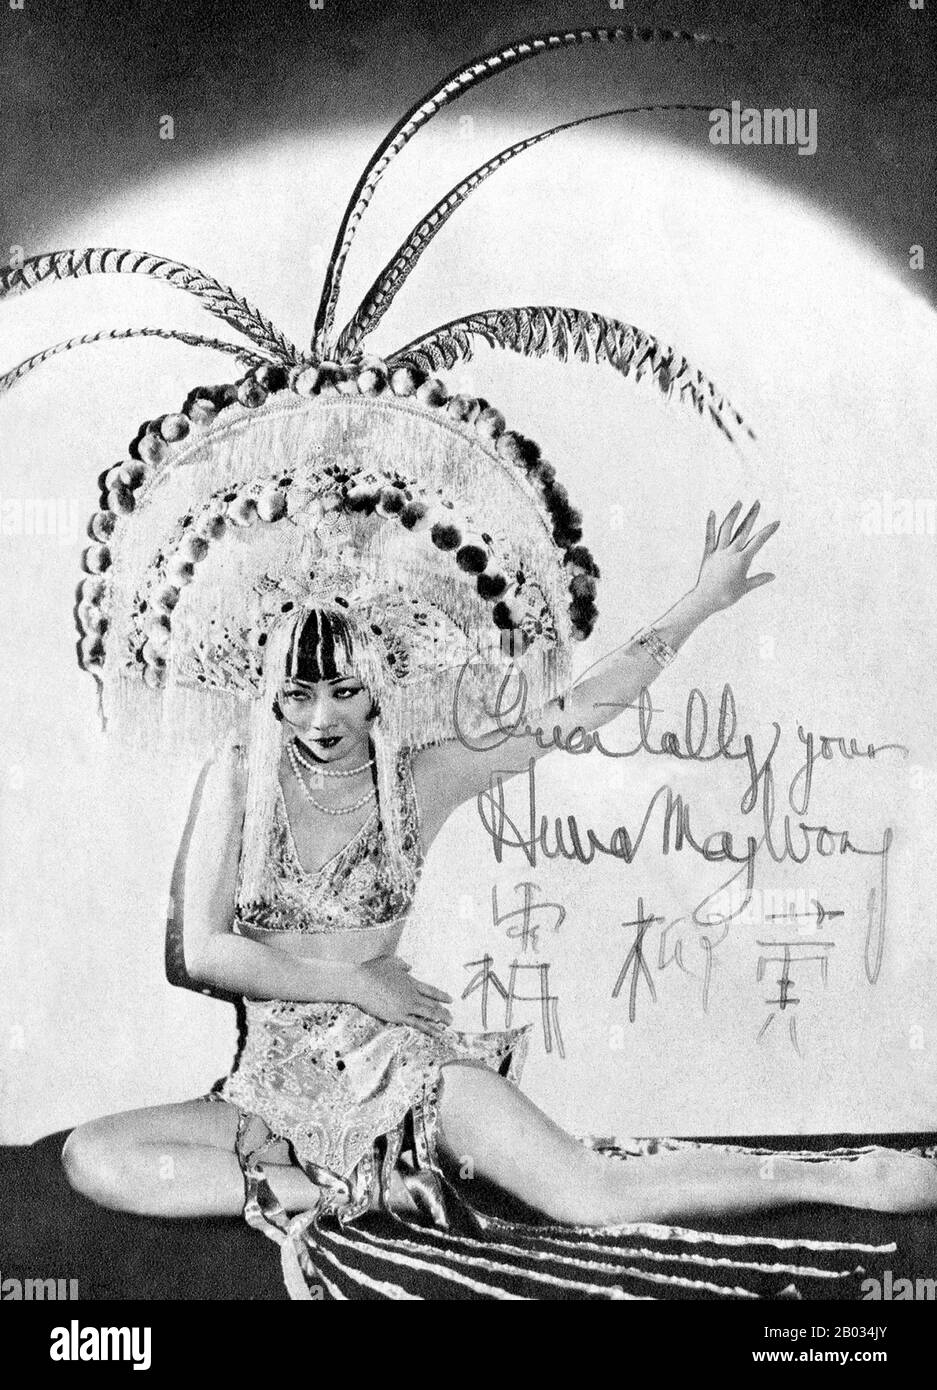 Anna May Wong (January 3, 1905 – February 3, 1961) was an American actress, the first Chinese American movie star, and the first Asian American to become an international star. Her long and varied career spanned both silent and sound film, television, stage, and radio.  Wong was featured in films of the early sound era, such as Daughter of the Dragon (1931) and Daughter of Shanghai (1937), and with Marlene Dietrich in Josef von Sternberg's Shanghai Express (1932). In 1935 Wong was dealt the most severe disappointment of her career, when Metro-Goldwyn-Mayer refused to consider her for the leadi Stock Photo